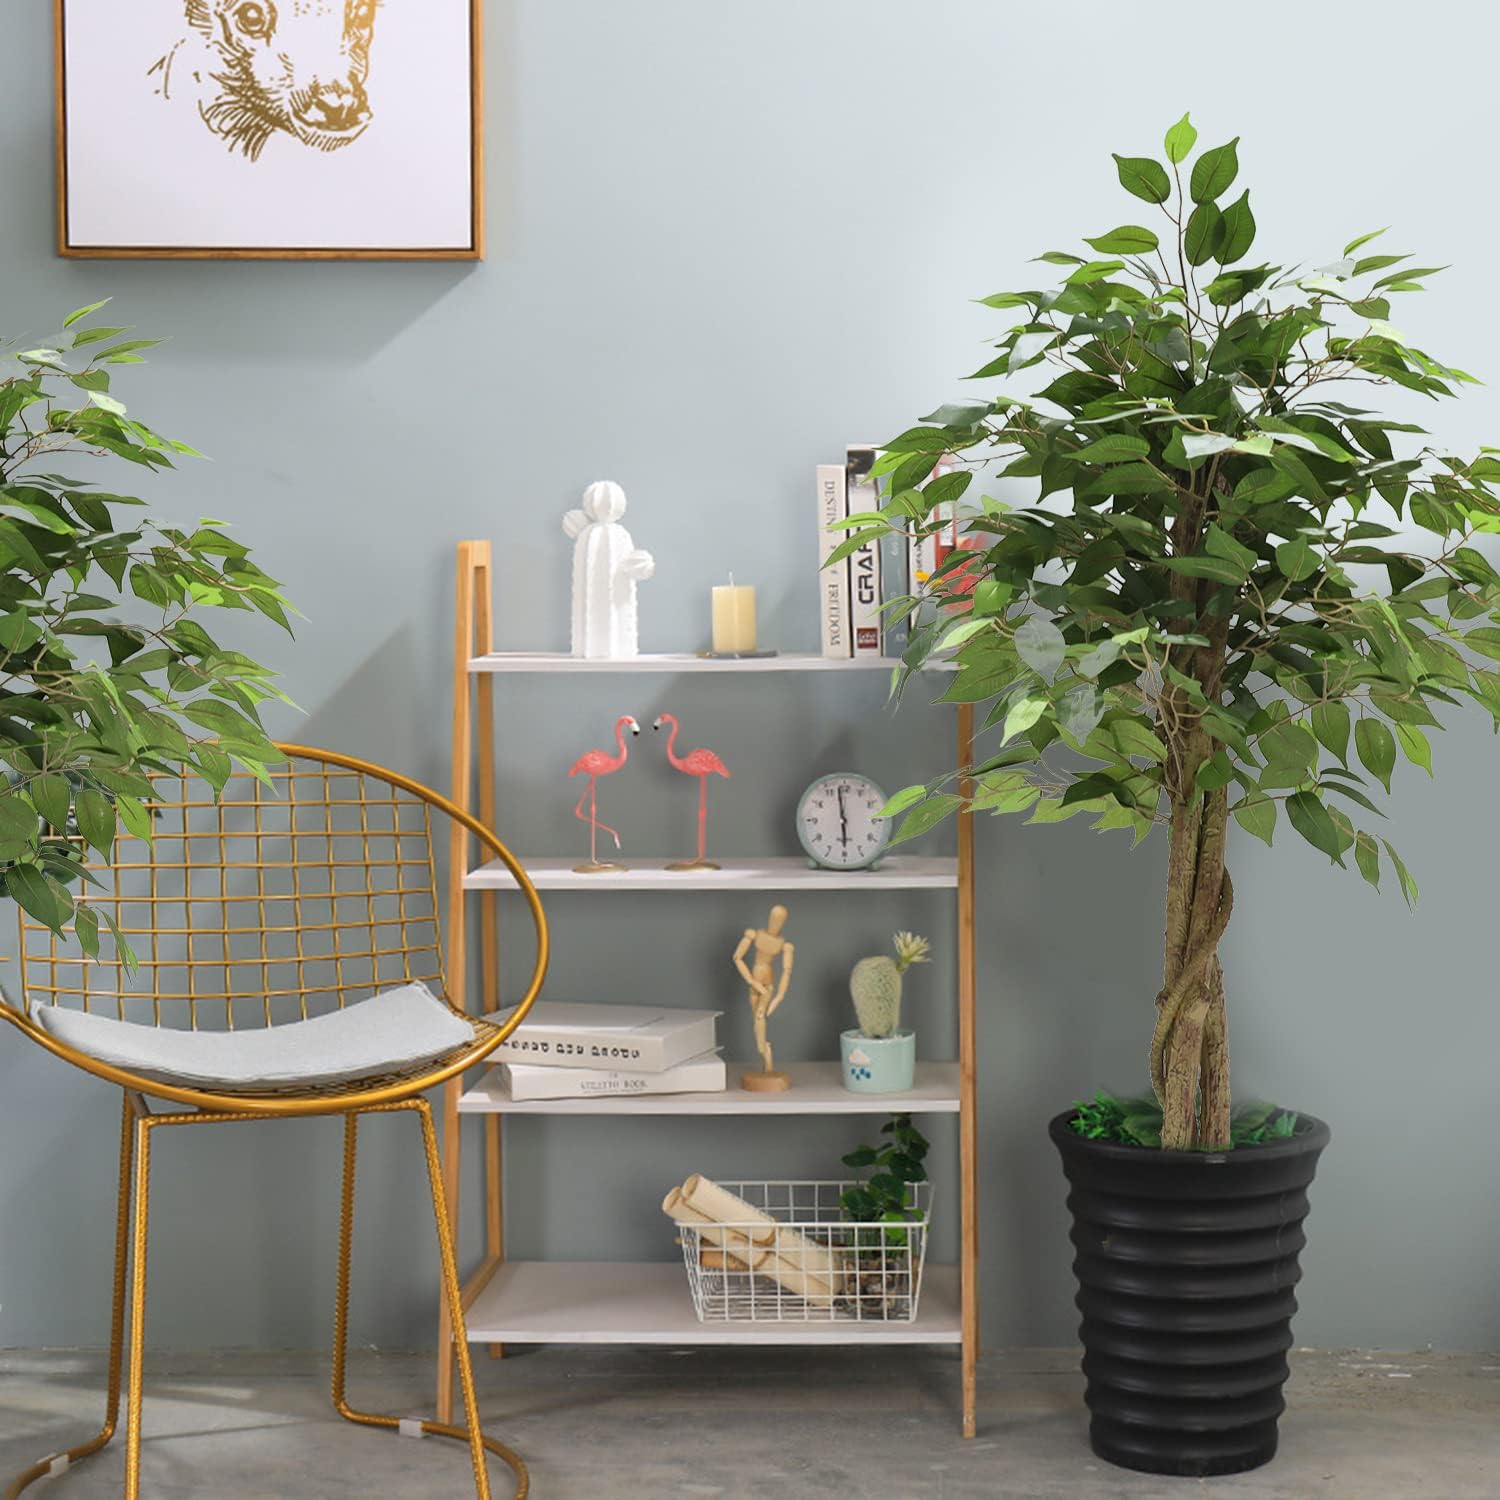 4ft Artificial Ficus Silk Tree for Indoor/ Outdoor decor Graceland Home and Living